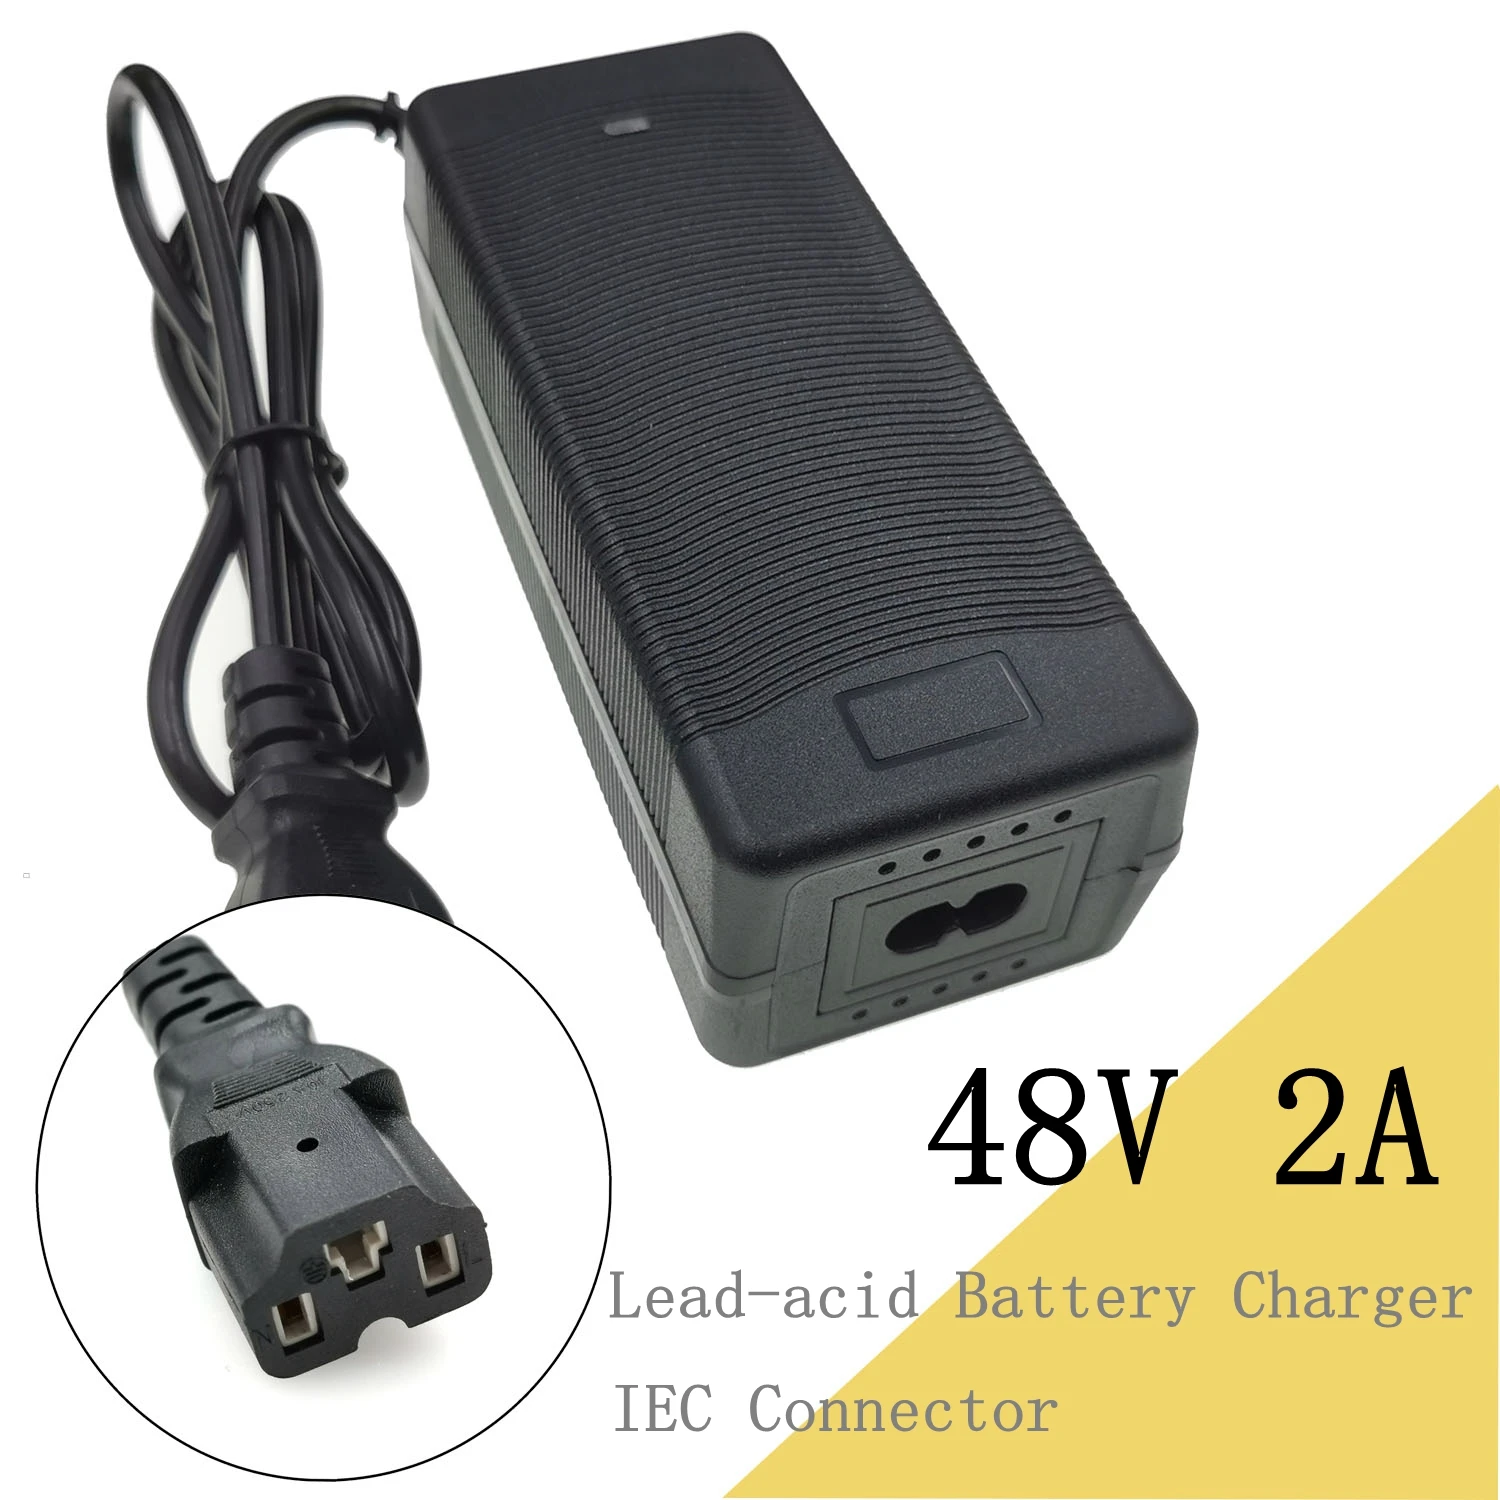 

48V 2A Lead-acid Battery Charger for 57.6V Lead acid Battery Electric Bicycle Bike Scooters Motorcycle Charger IEC Connector